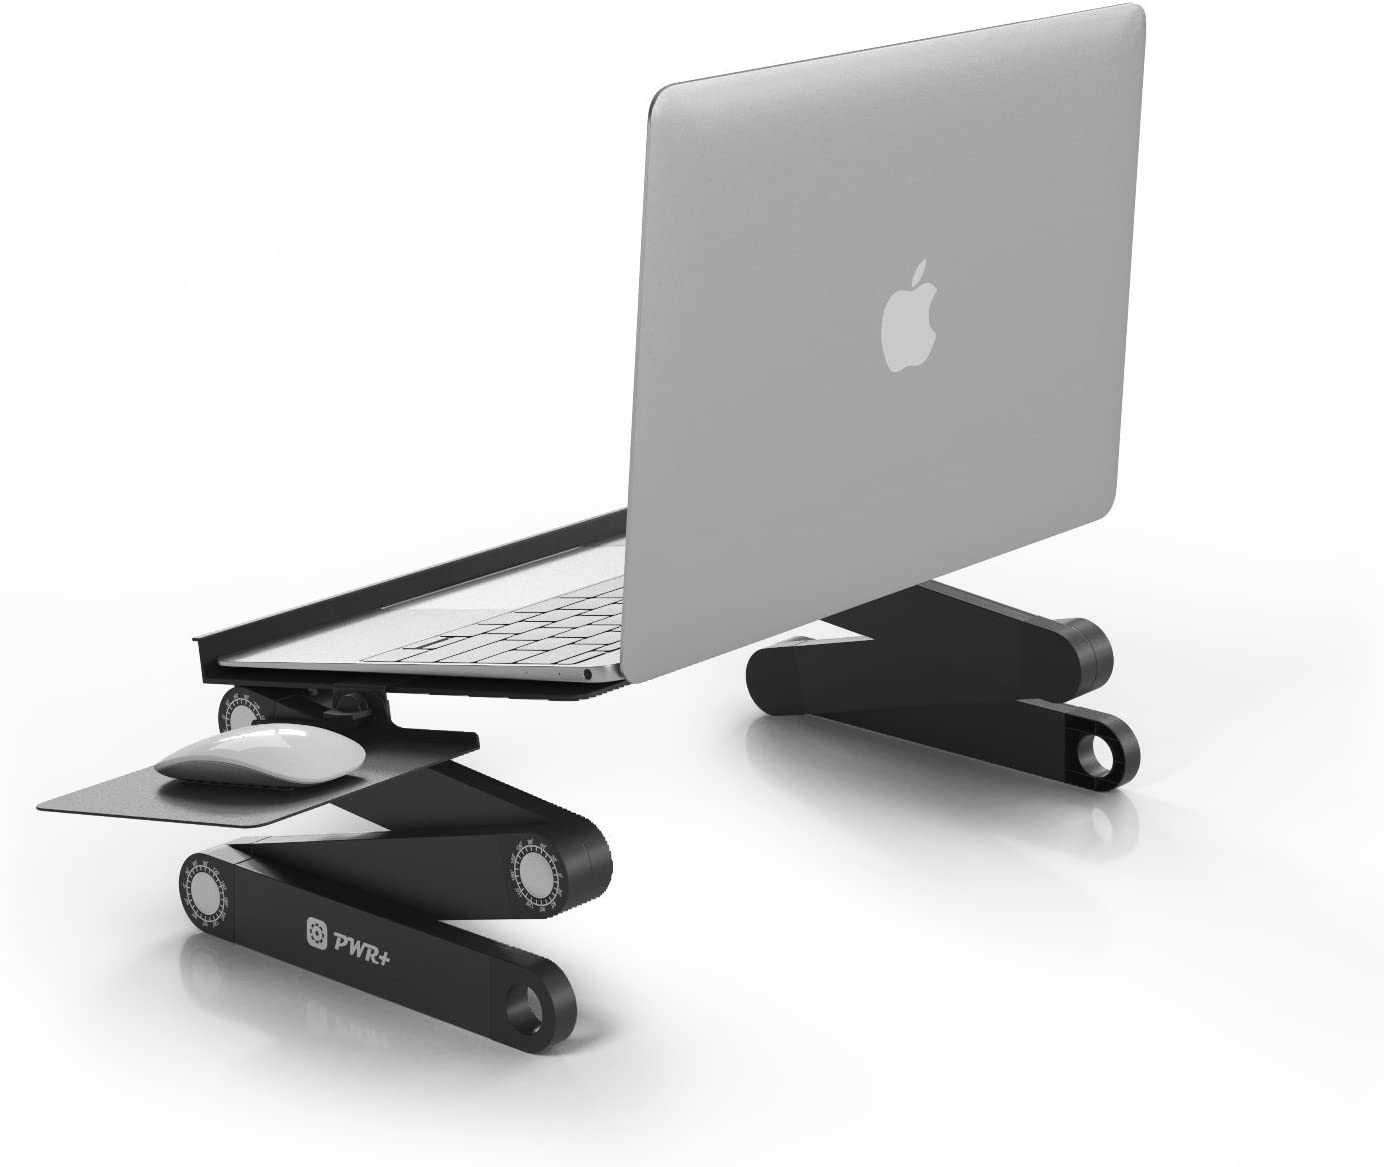 Laptop-Table-Stand-Adjustable-Riser-Portable-with-Mouse-Pad-Fully-Ergonomic-Mount-Ultrabook-MacBook-Gaming-Notebook-Light-Weight-Aluminum-Black-Bed-Tray-Desk-Book-Fans-Up-to-17-inch